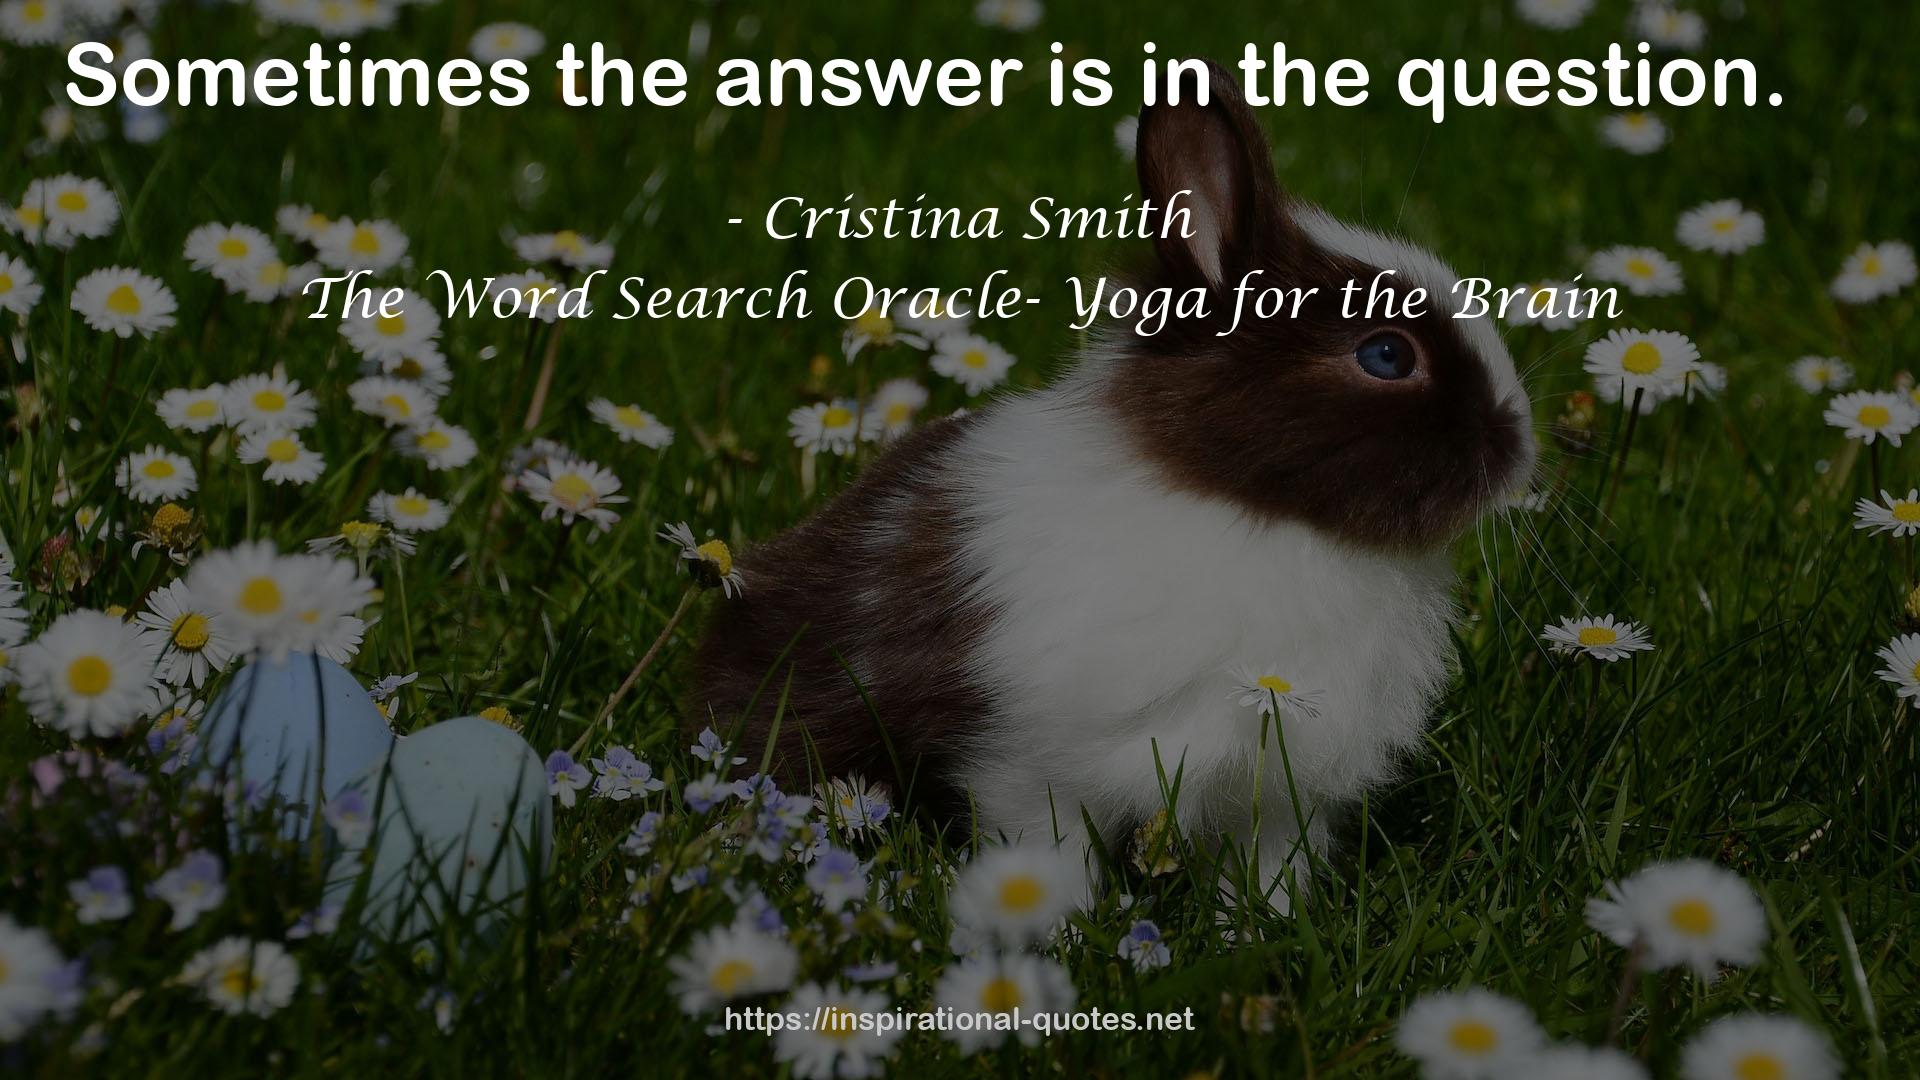 The Word Search Oracle- Yoga for the Brain QUOTES